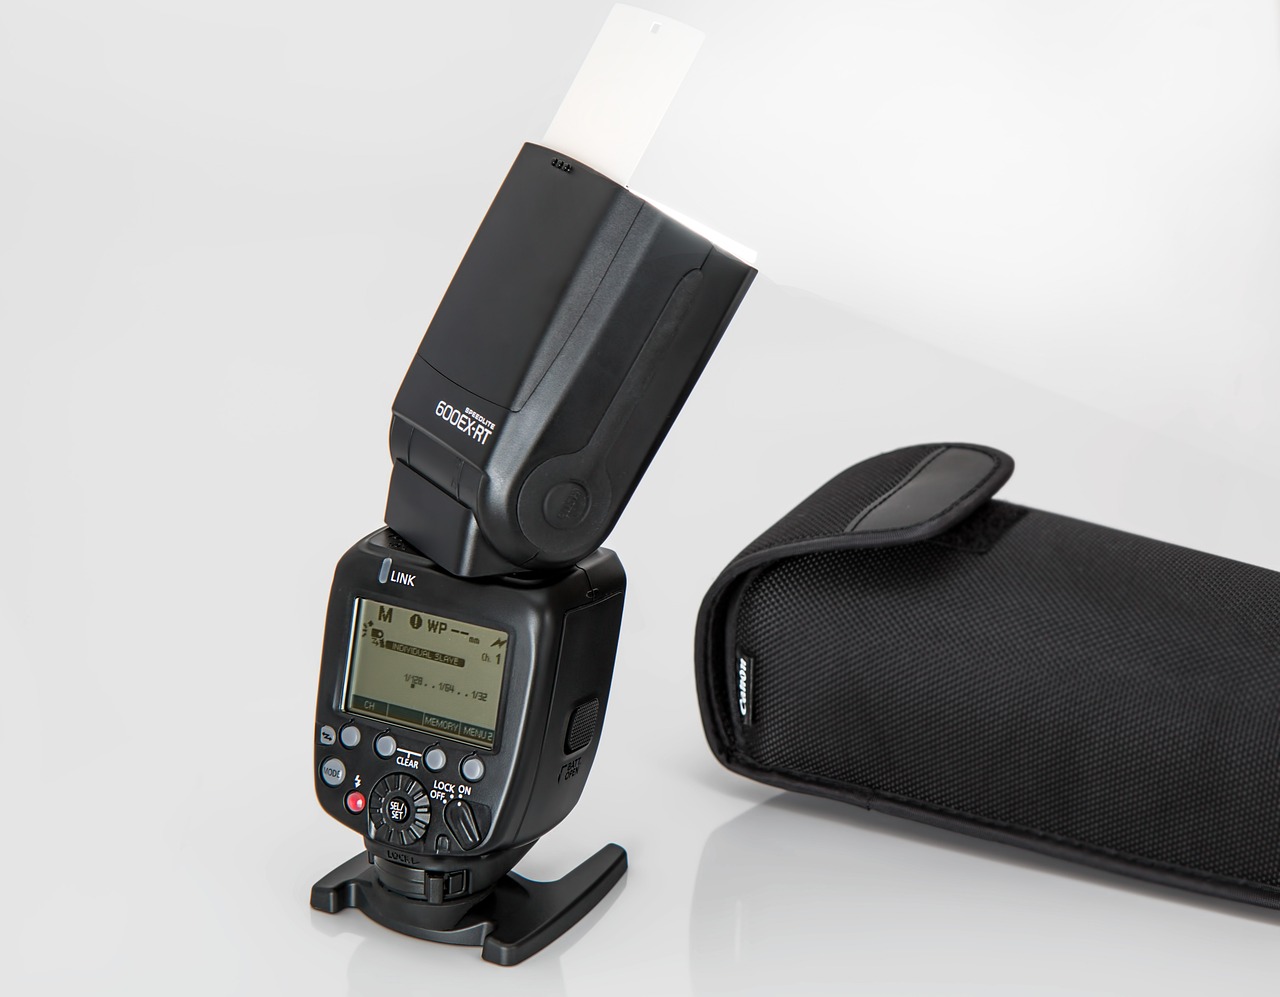 a flash camera sitting on top of a black case, softbox key light, h 640, product introduction photo, iso 800